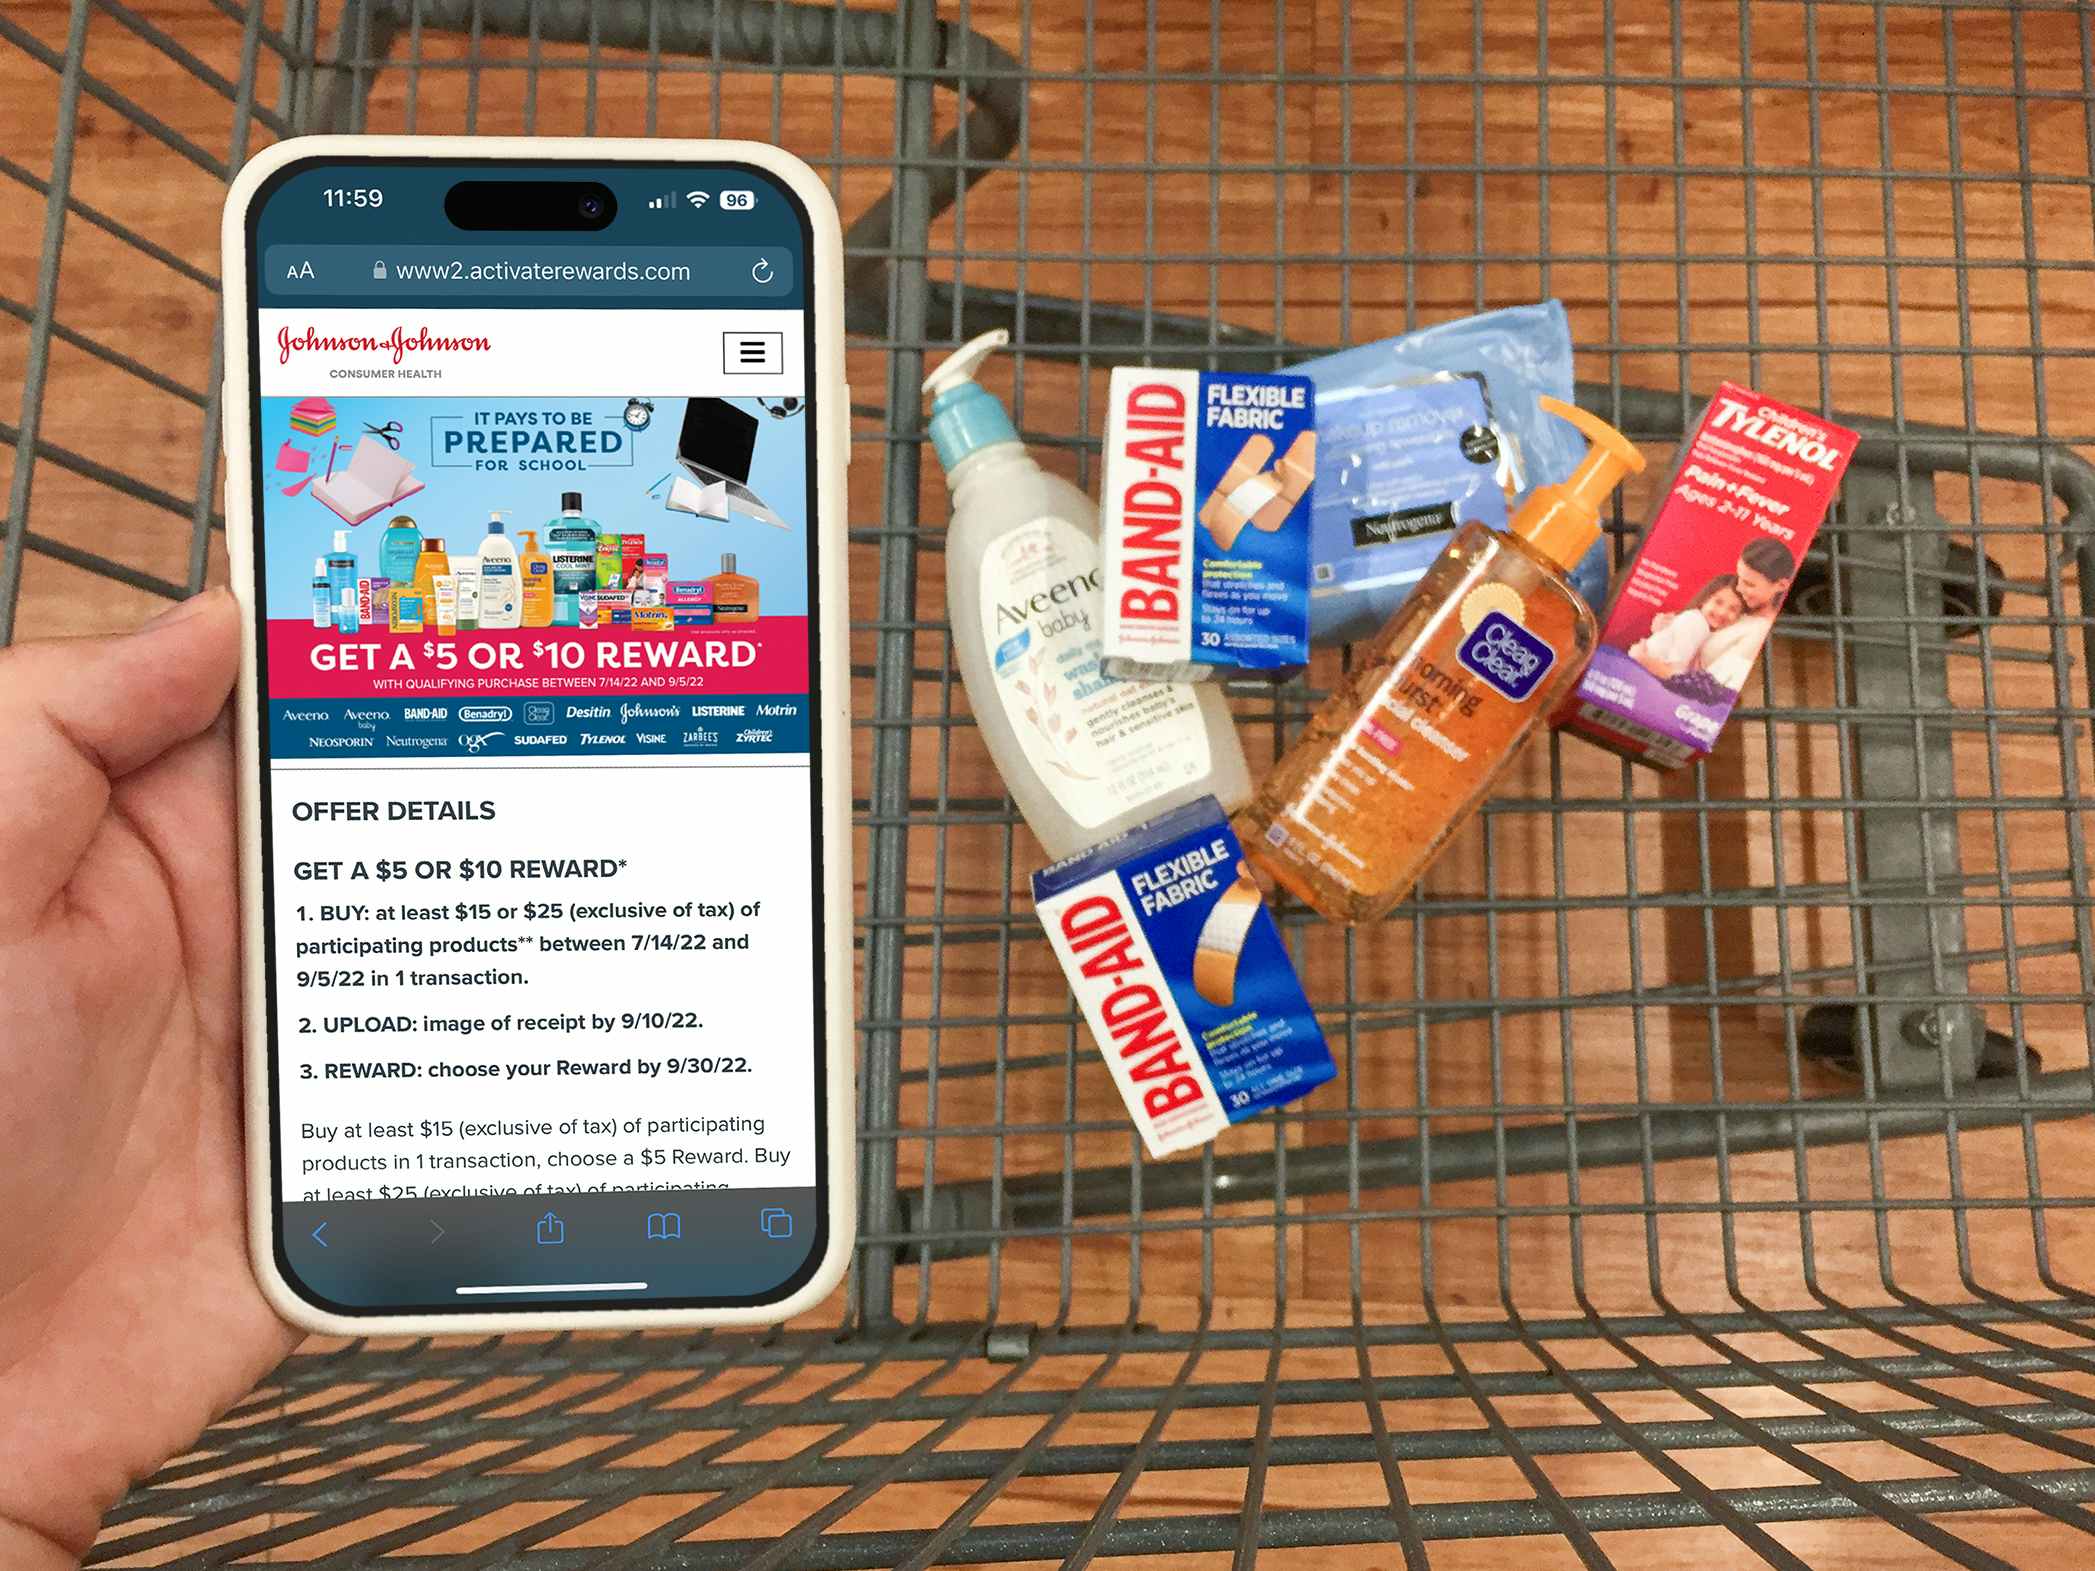 Someone holding a phone displaying the Offer Details for the Johnson & Johnson back to school rebate with a cart of eligible products in the background